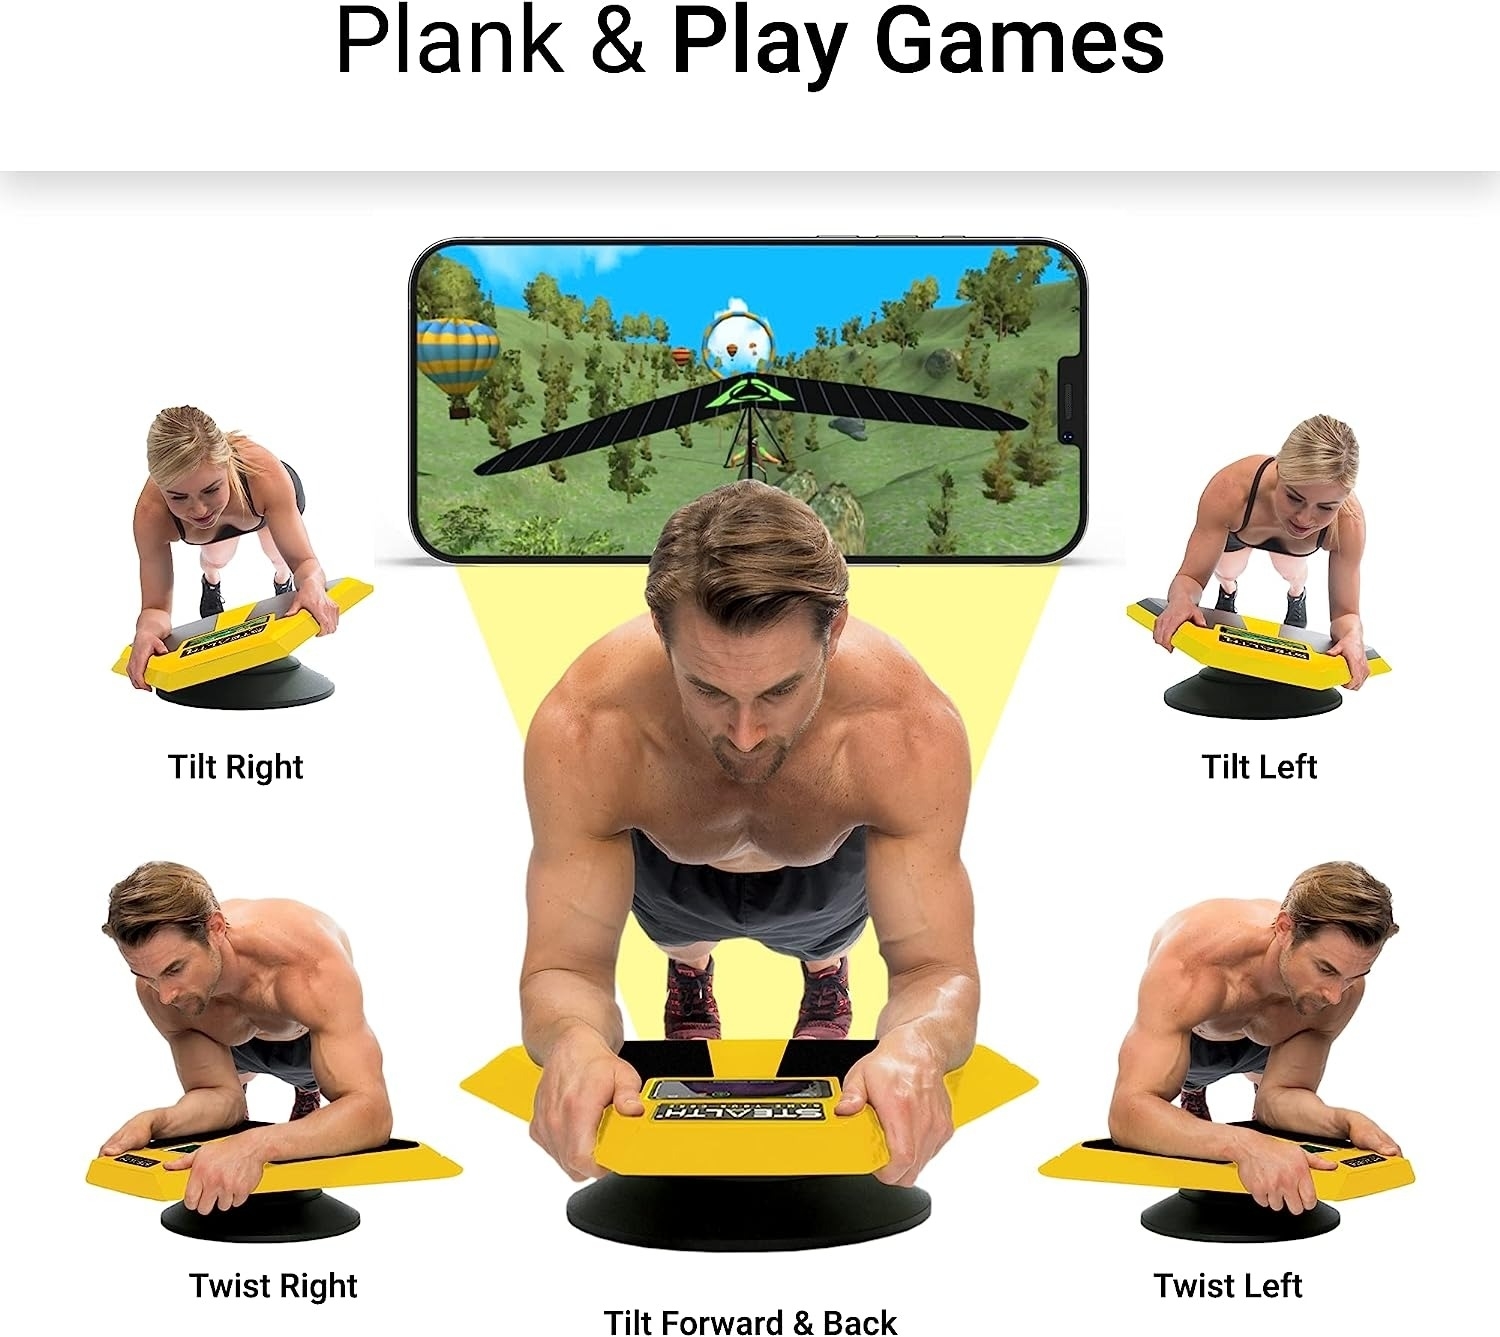 Promotional image for interactive fitness game with various plank exercises demonstrated by a person on a balance board